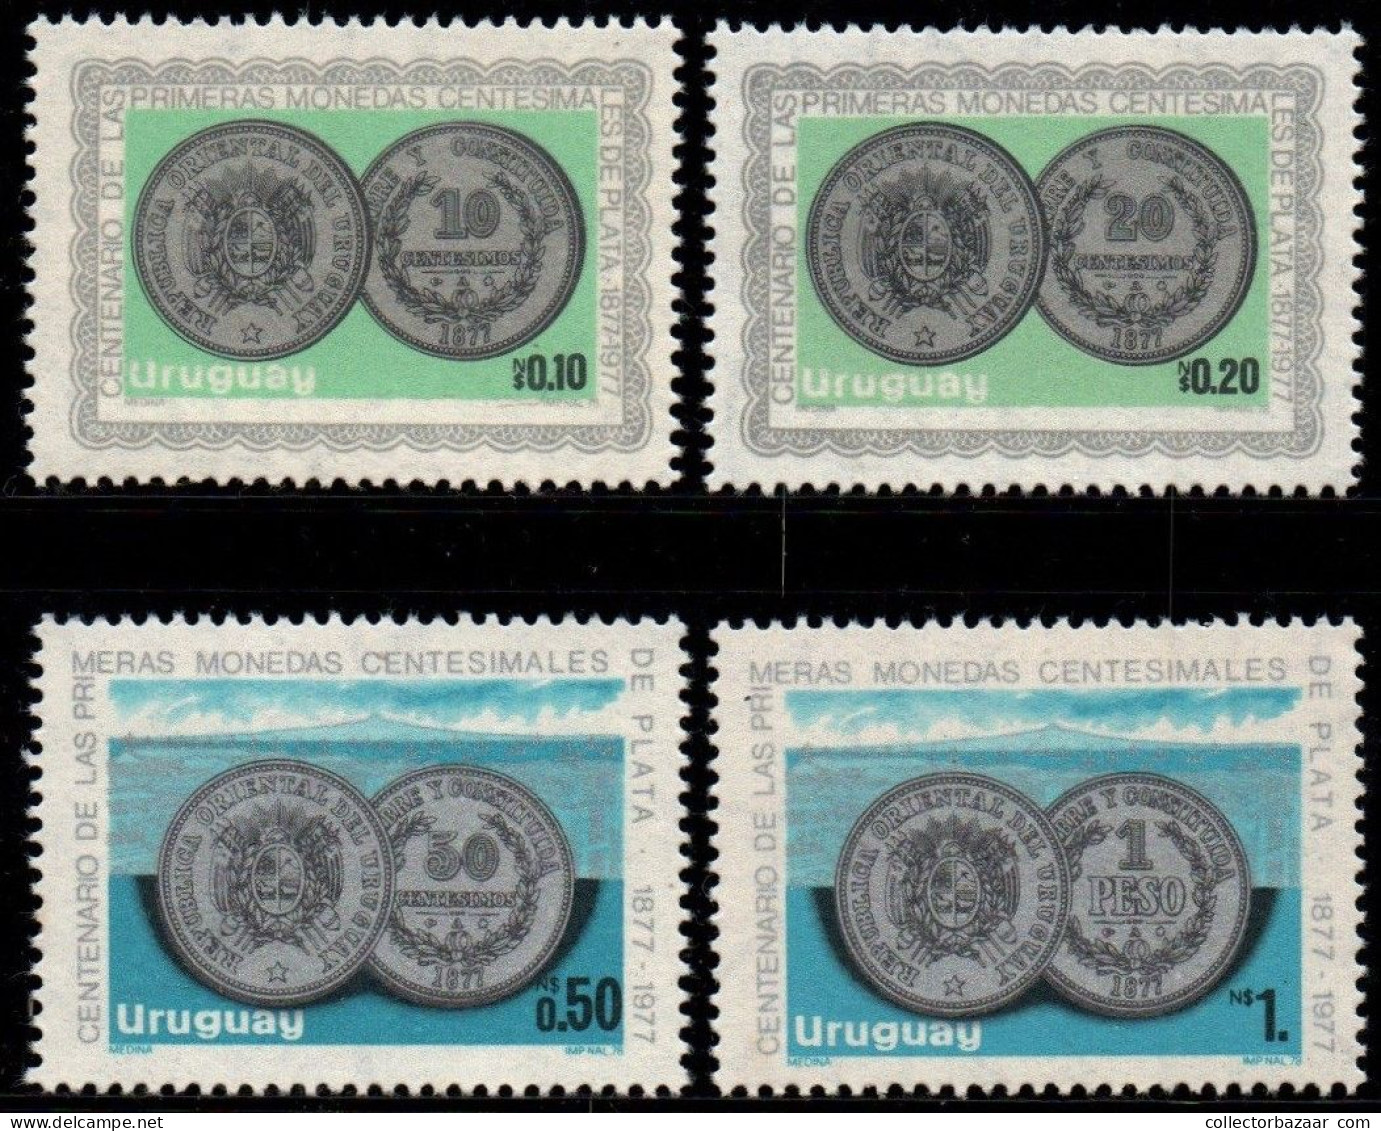 1979 Uruguay Silver Coin Centenary Observe And Reverse Of Coins In Stamps #1054 - 1057  ** MNH - Uruguay